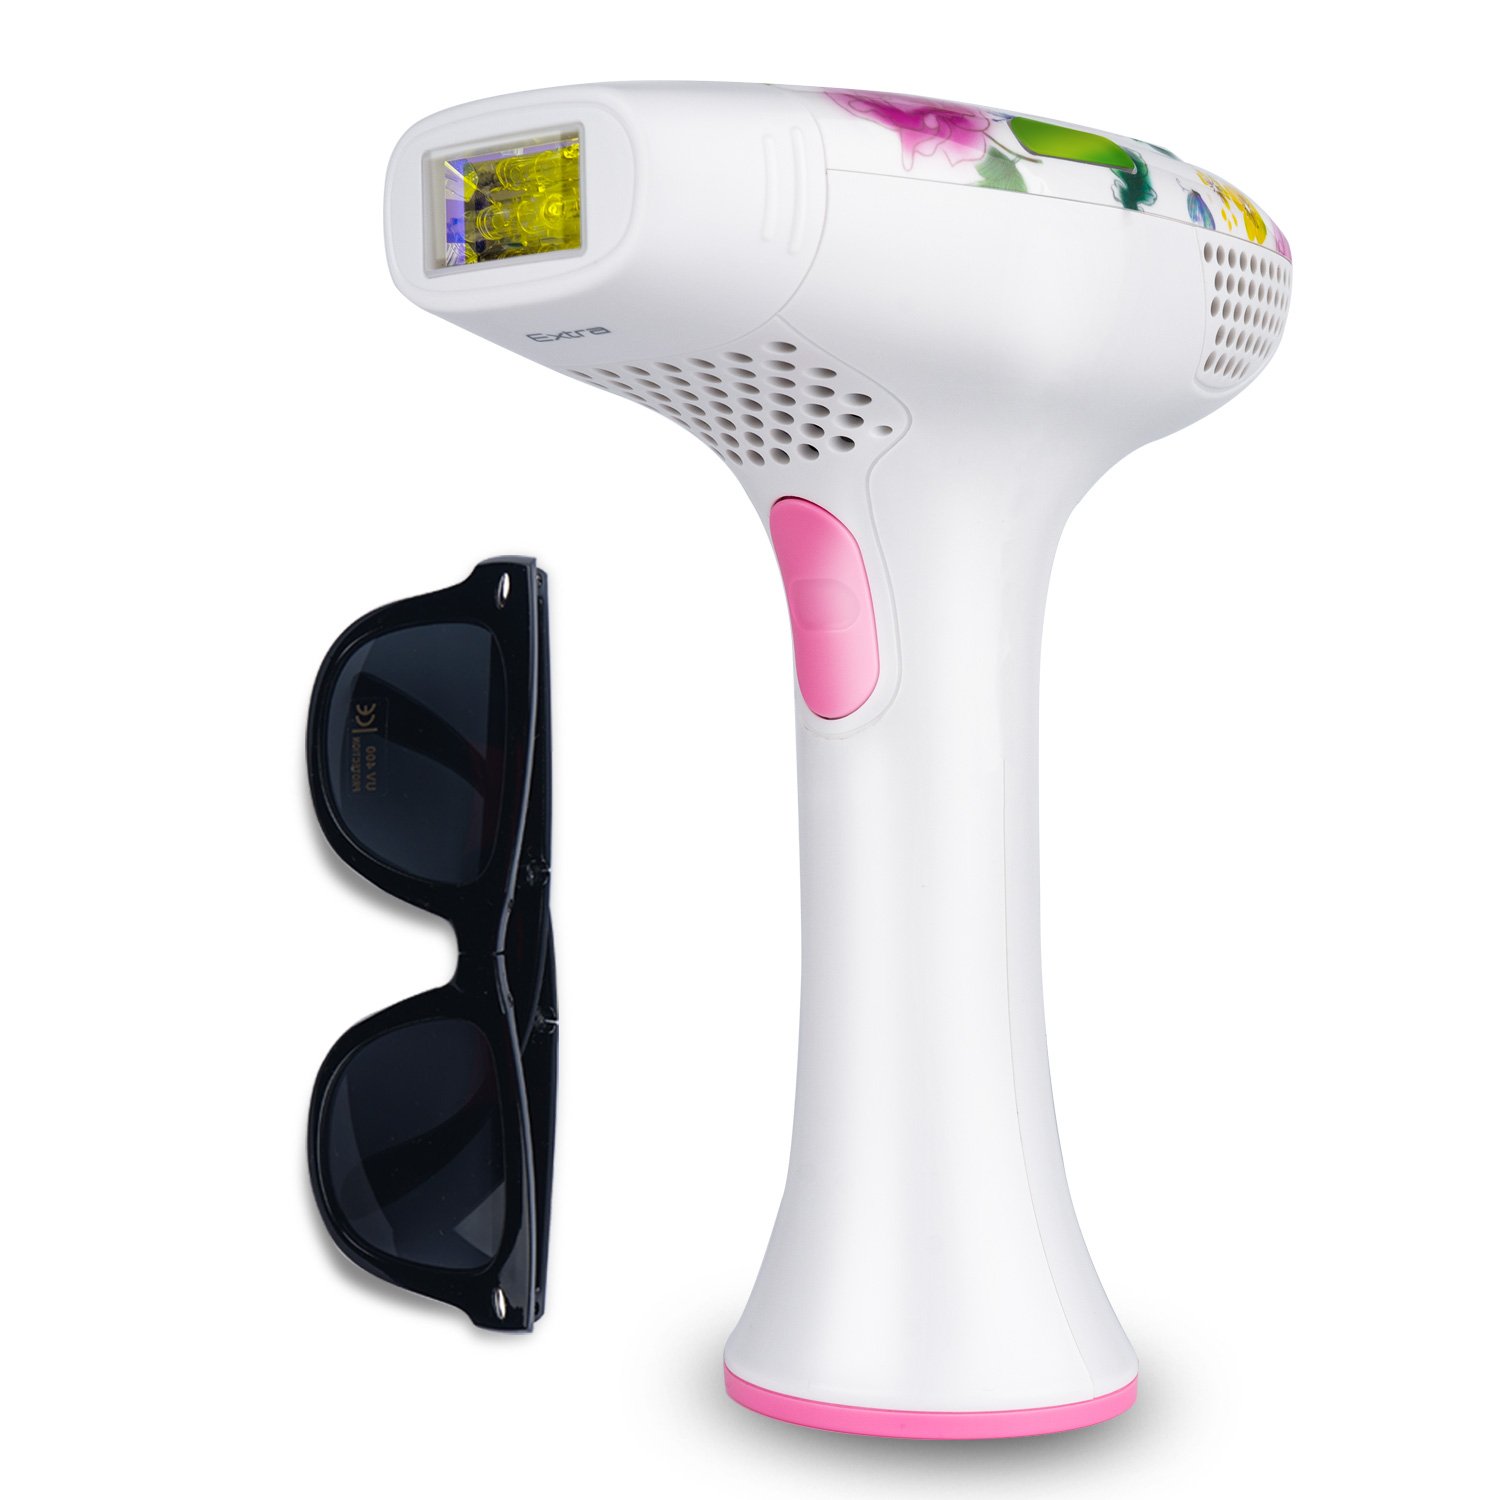 DEESS Series 2 IPL Hair Removal Device